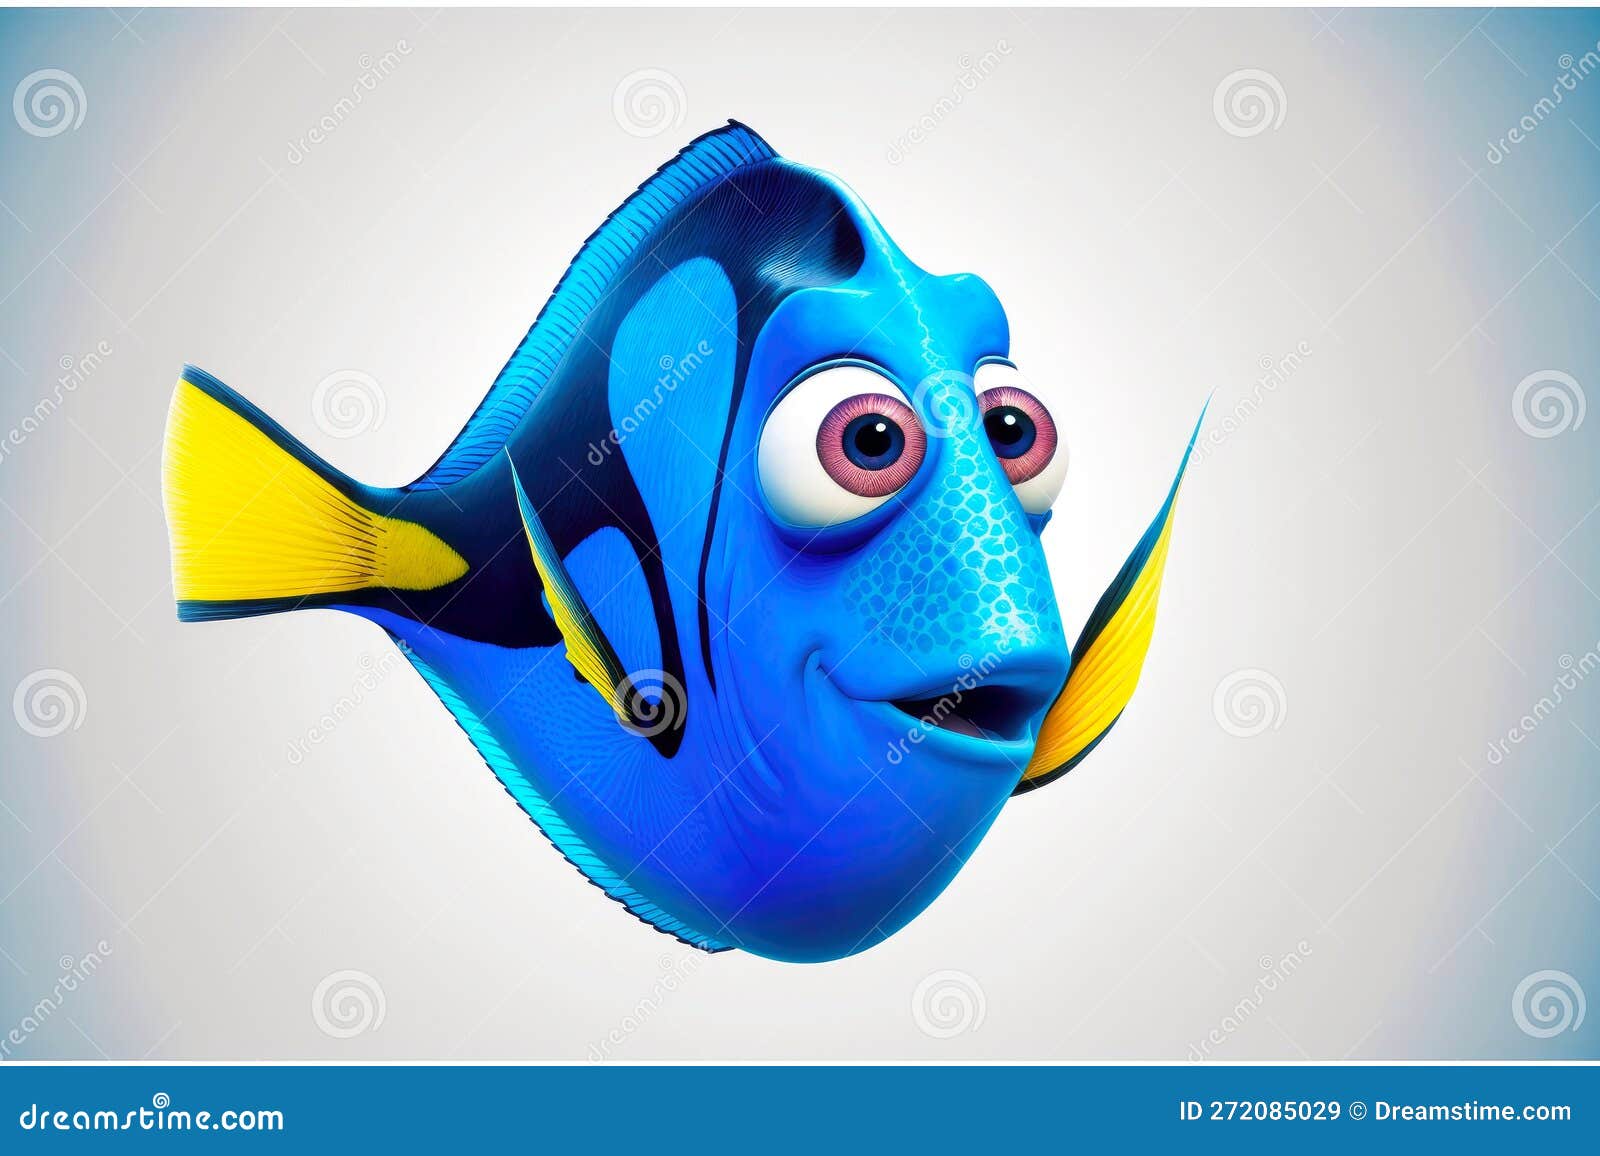 Fish Surgeon Blue Dory of Cartoon Finding Nemo Tropical Fish Isolated ...